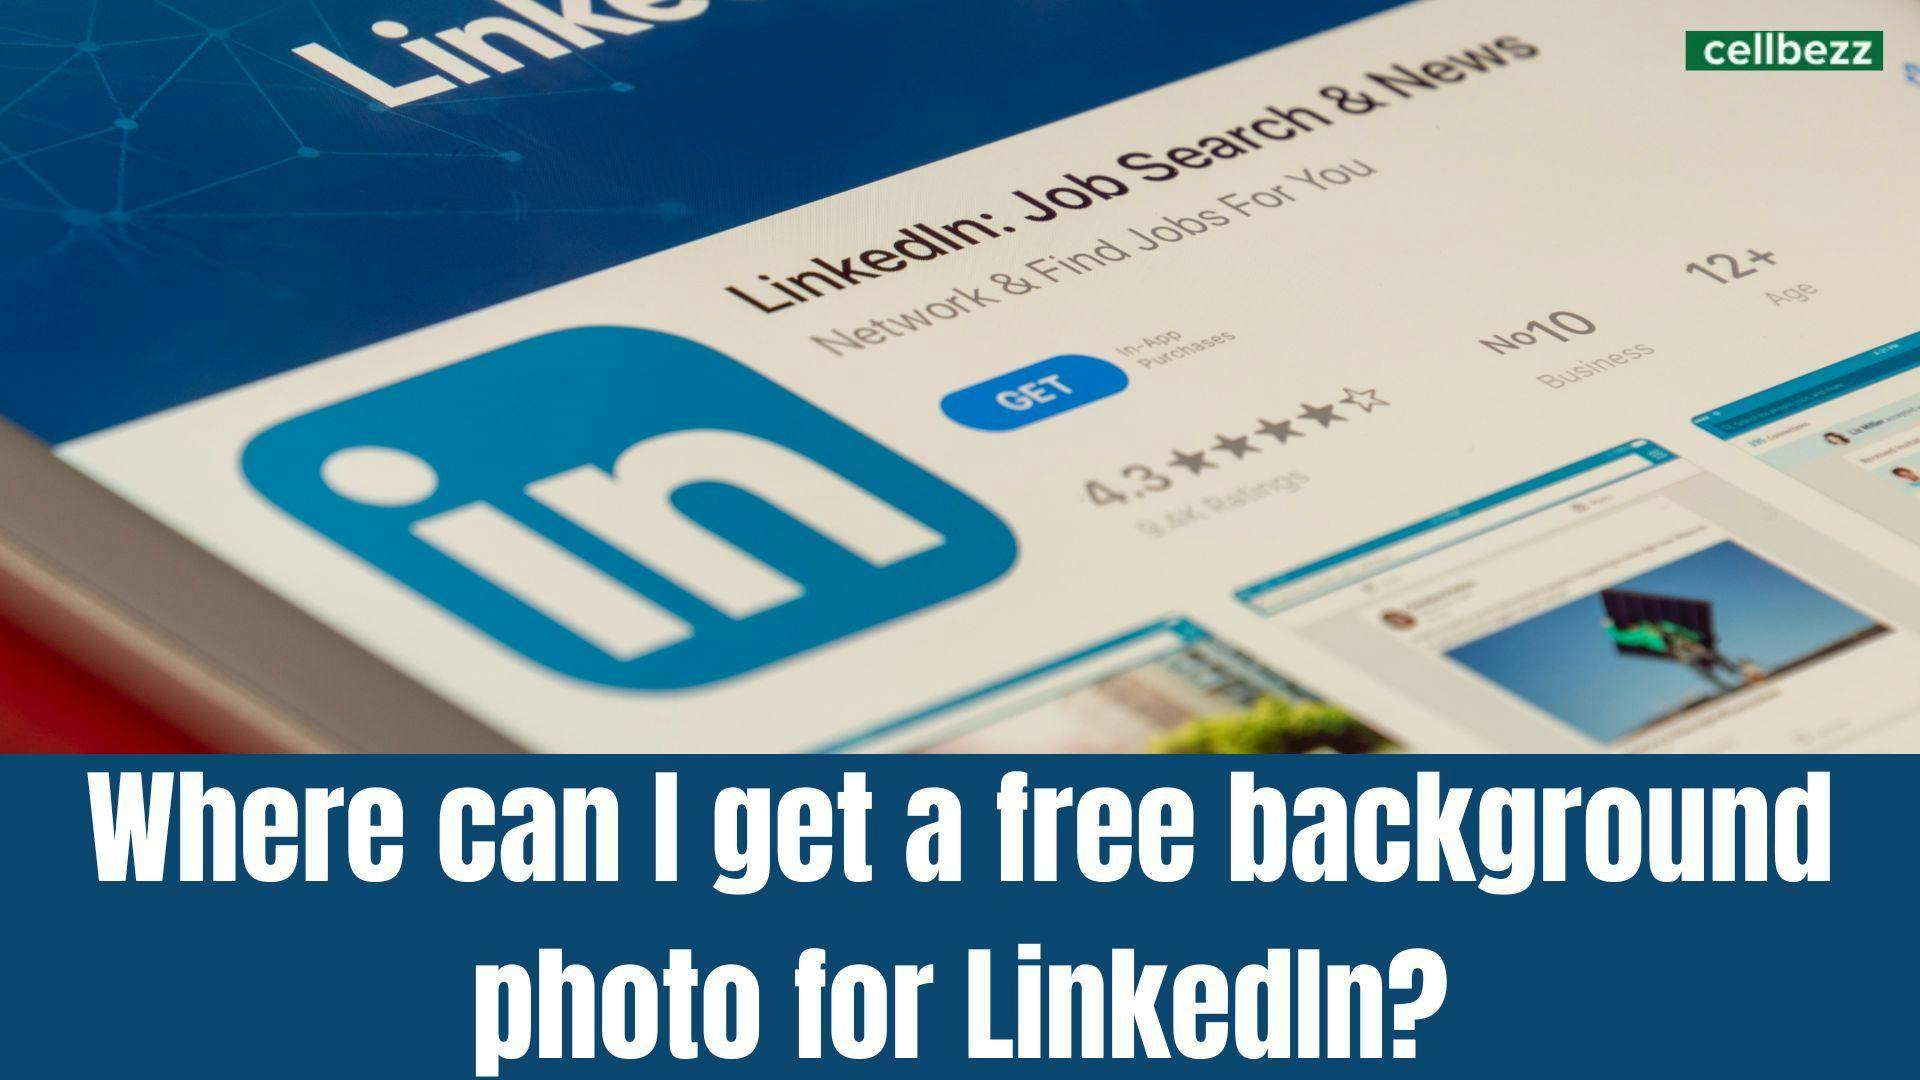 Where can I get a free background photo for LinkedIn? featured image 